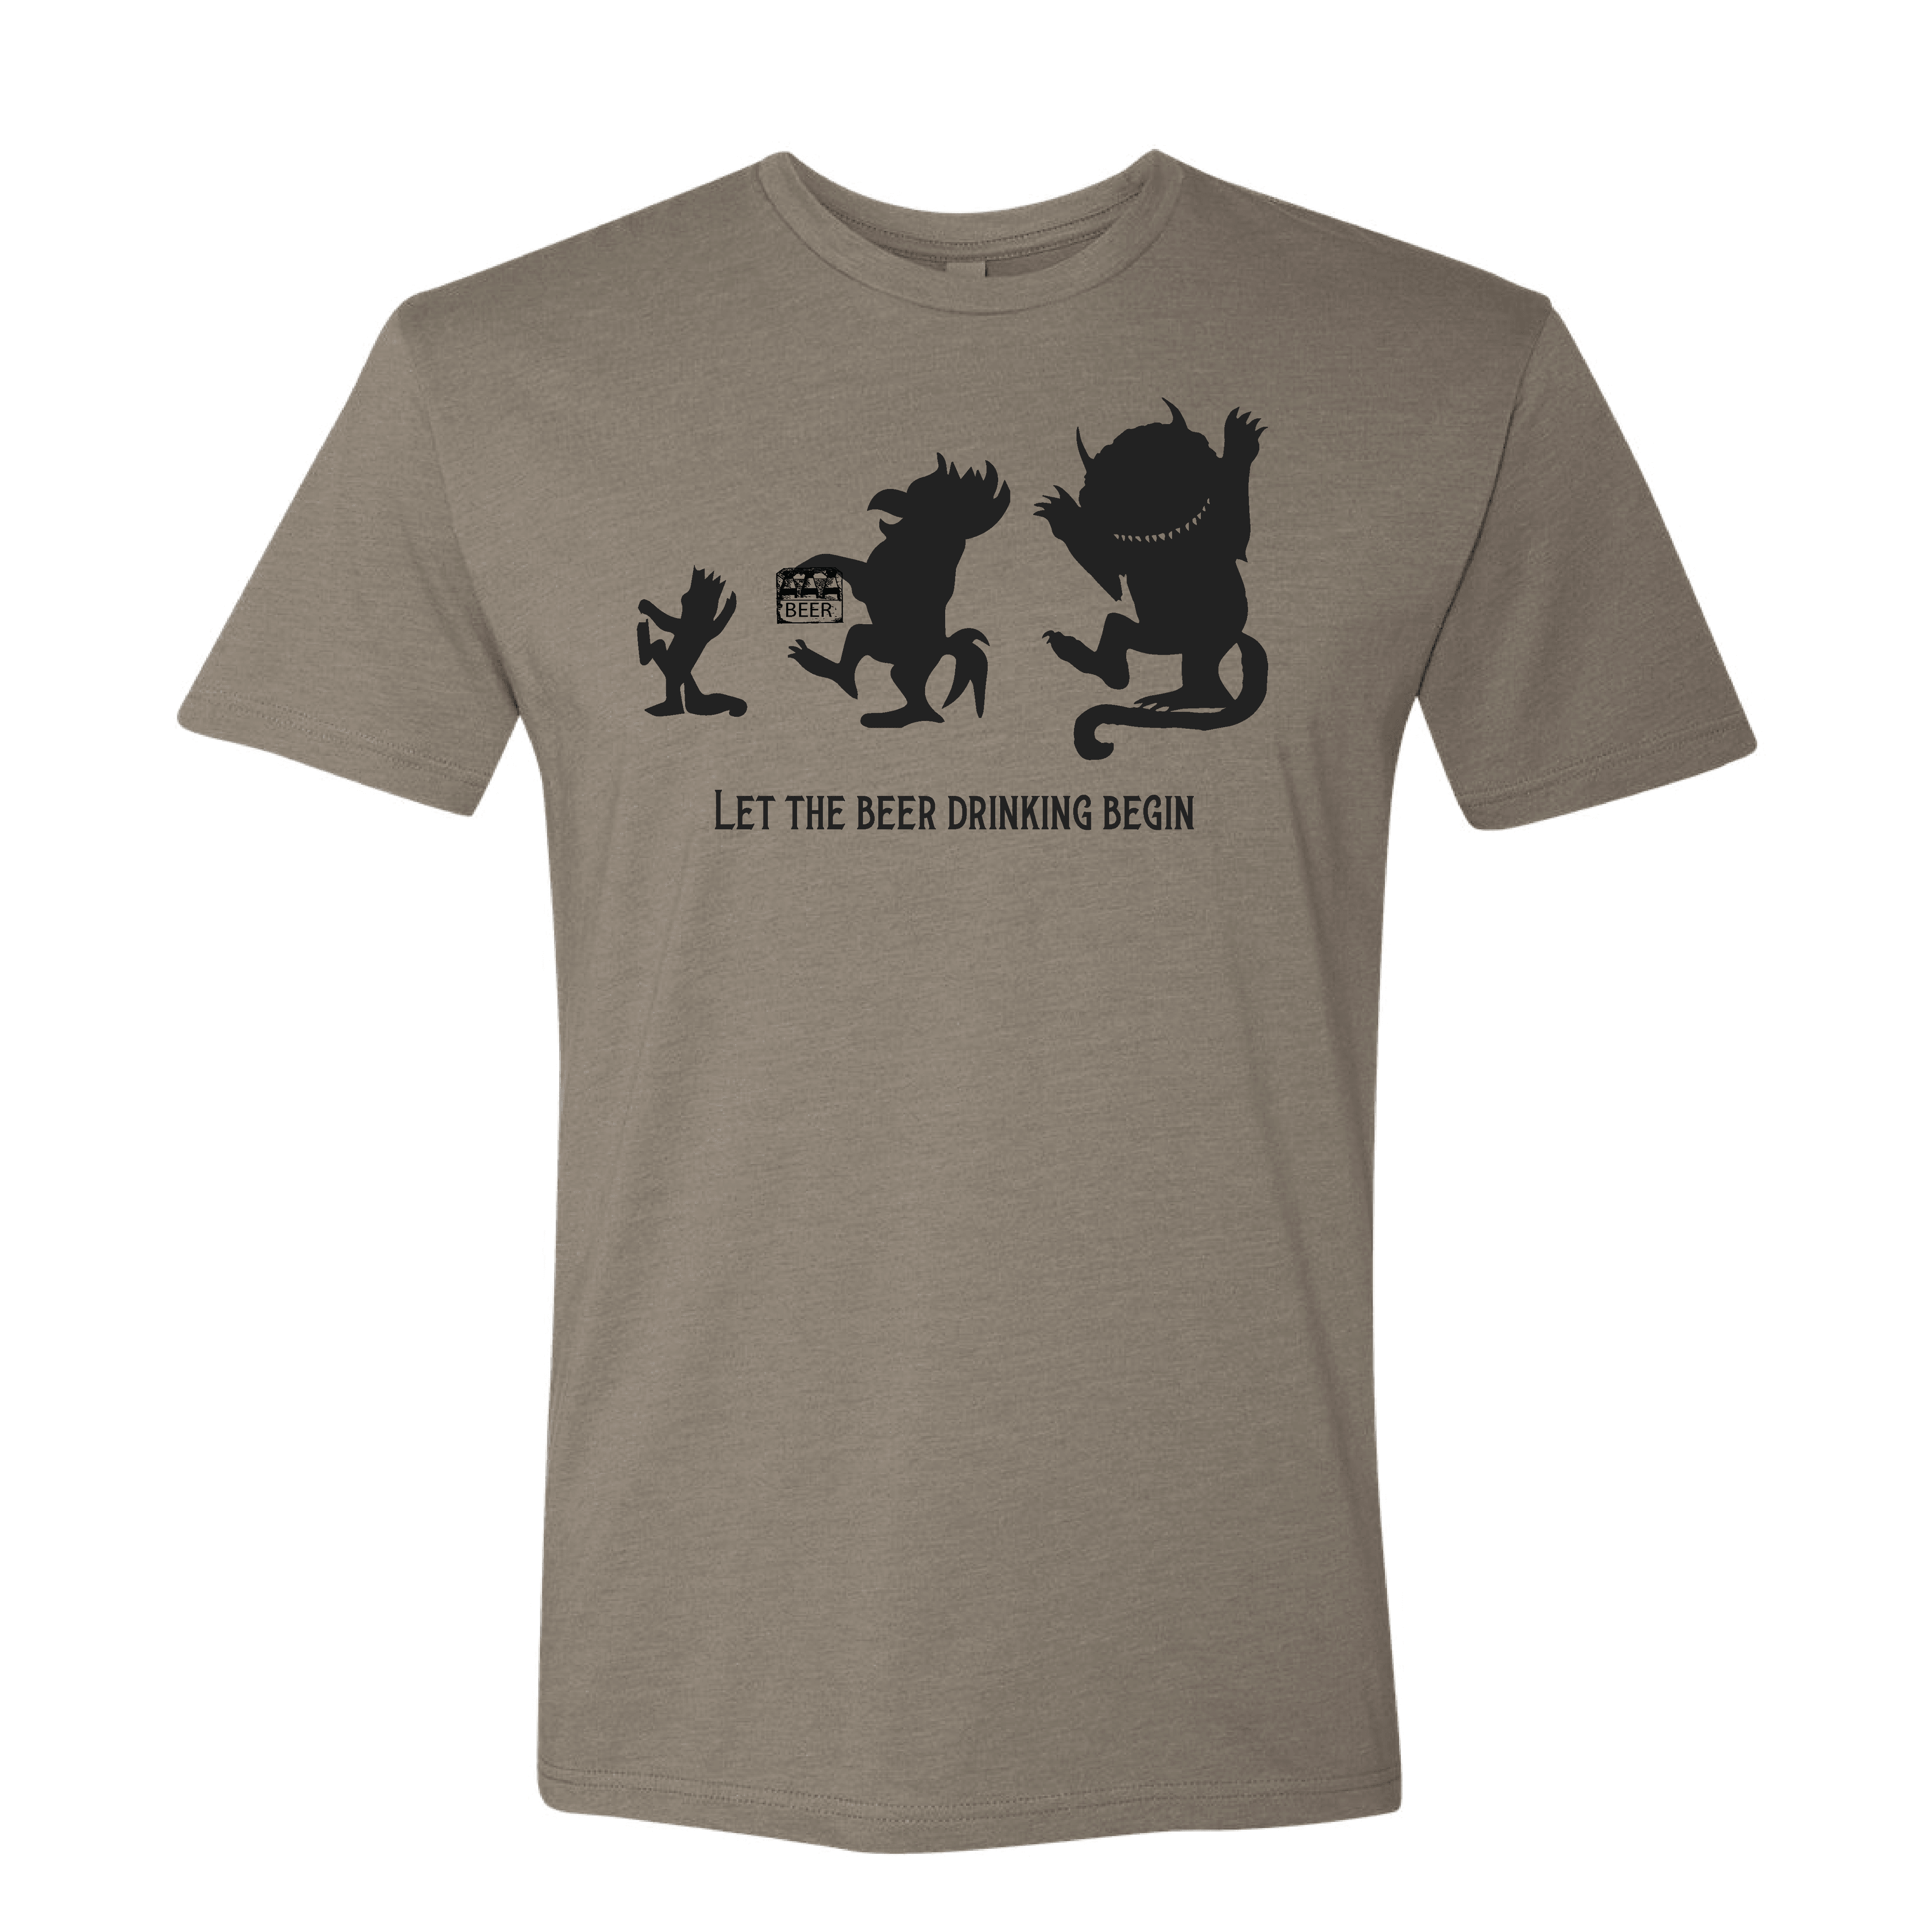 Let the Wild Drinking Begin T-Shirt - Ales to Trails